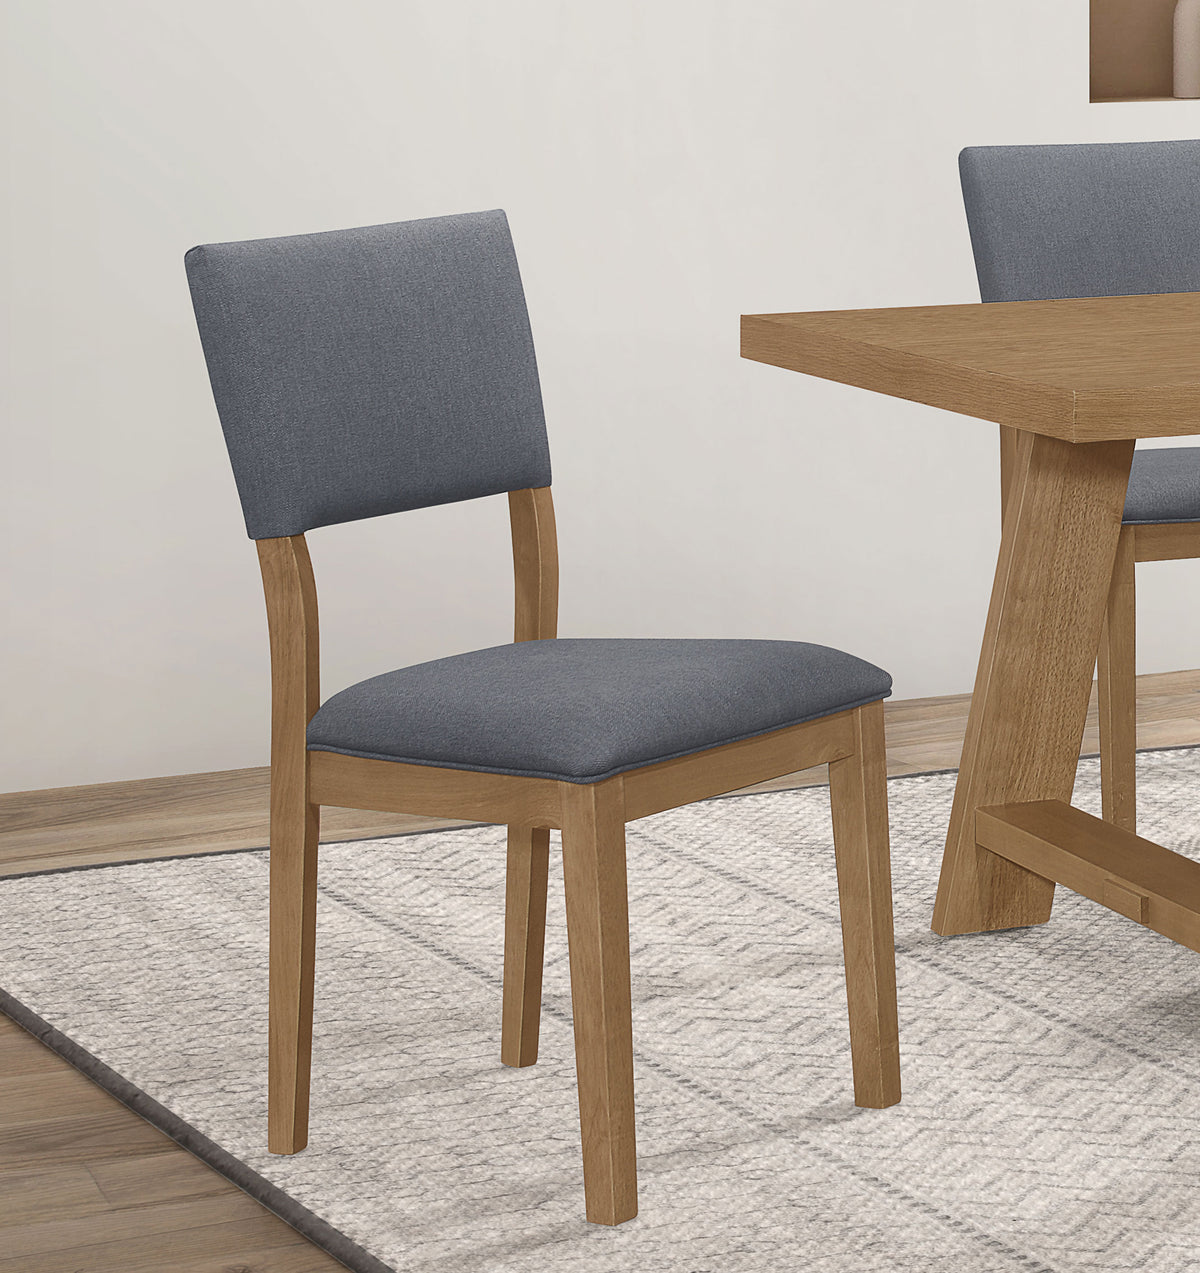 Sharon Open Back Padded Upholstered Dining Side Chair Blue and Brown (Set of 2) Sharon Open Back Padded Upholstered Dining Side Chair Blue and Brown (Set of 2) Half Price Furniture